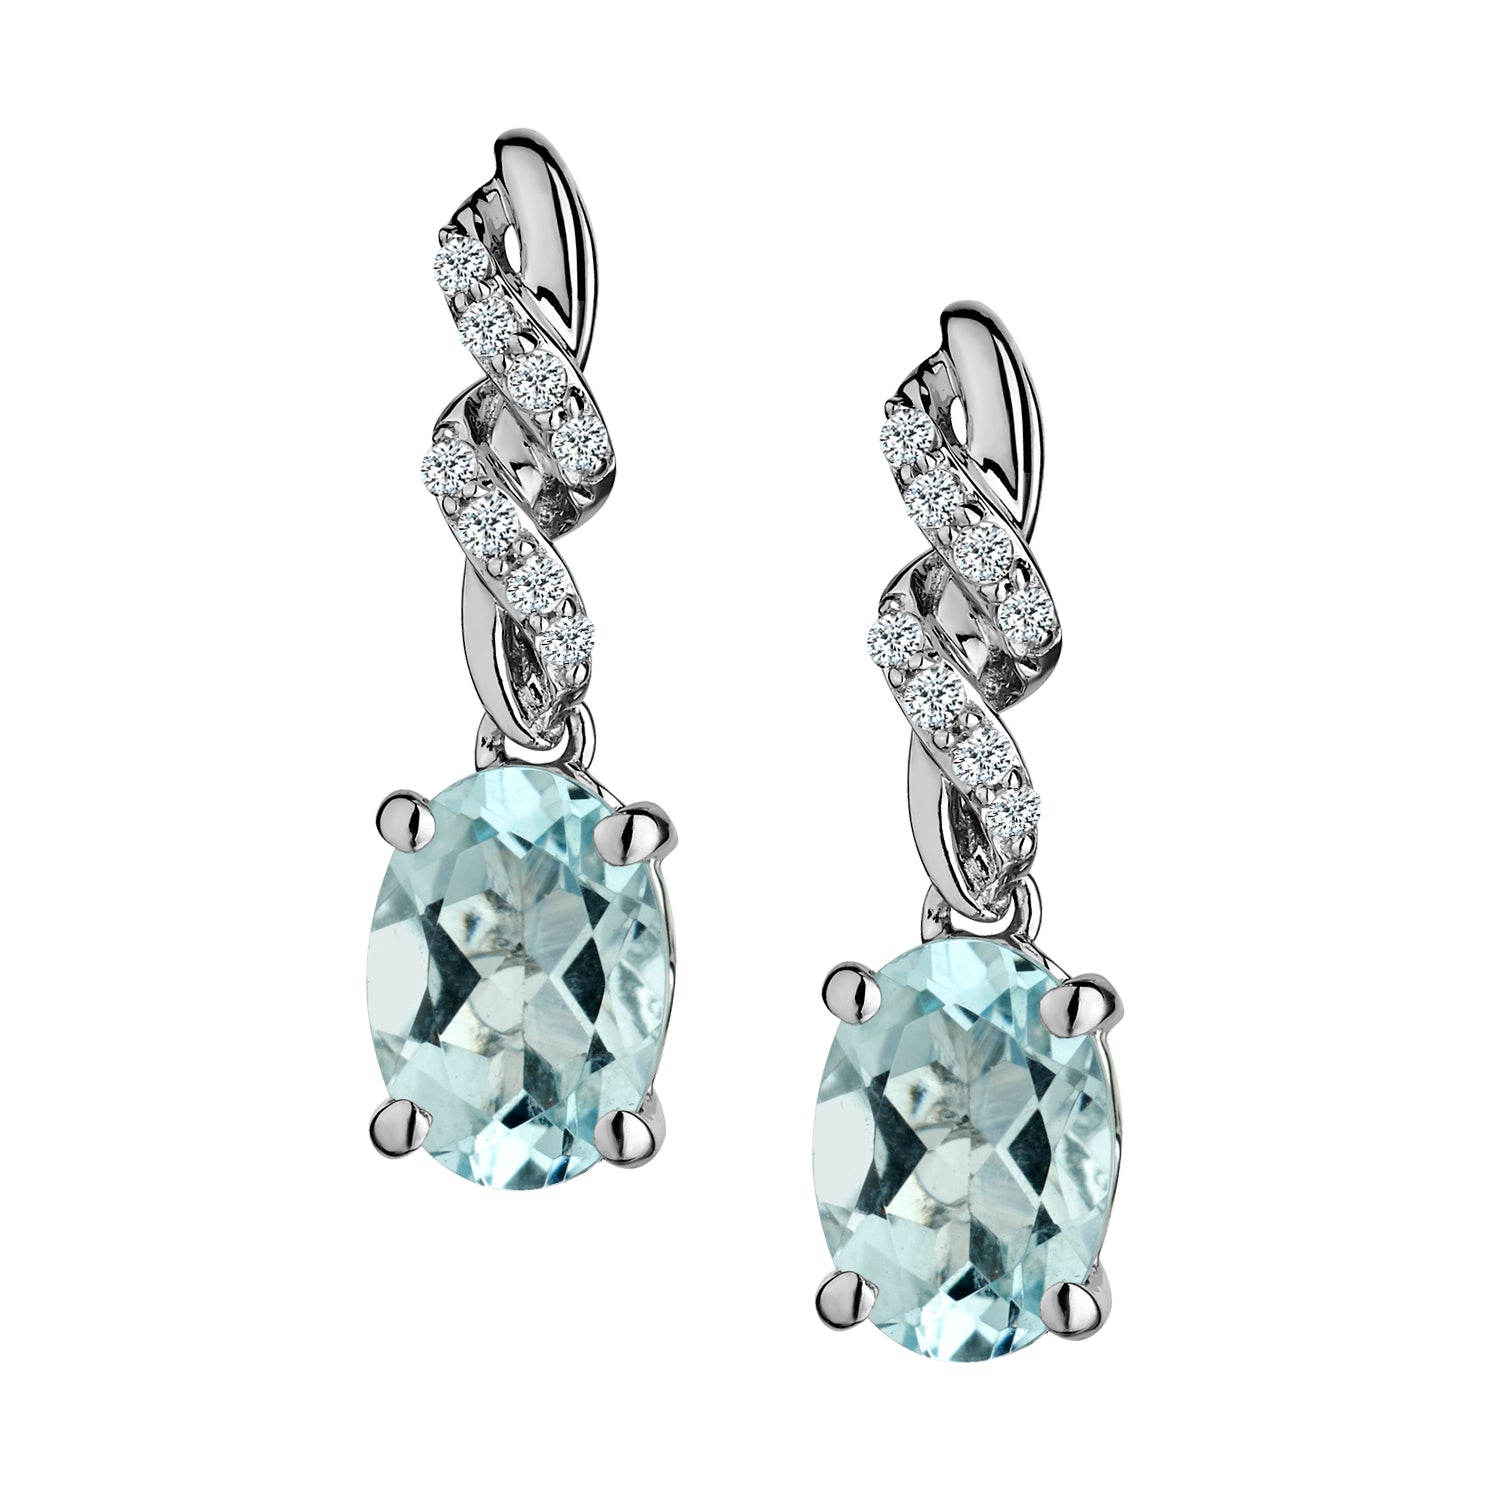 Genuine Aquamarine And White Sapphire Drop Earrings,  Sterling Silver.  Griffin Jewellery Designs